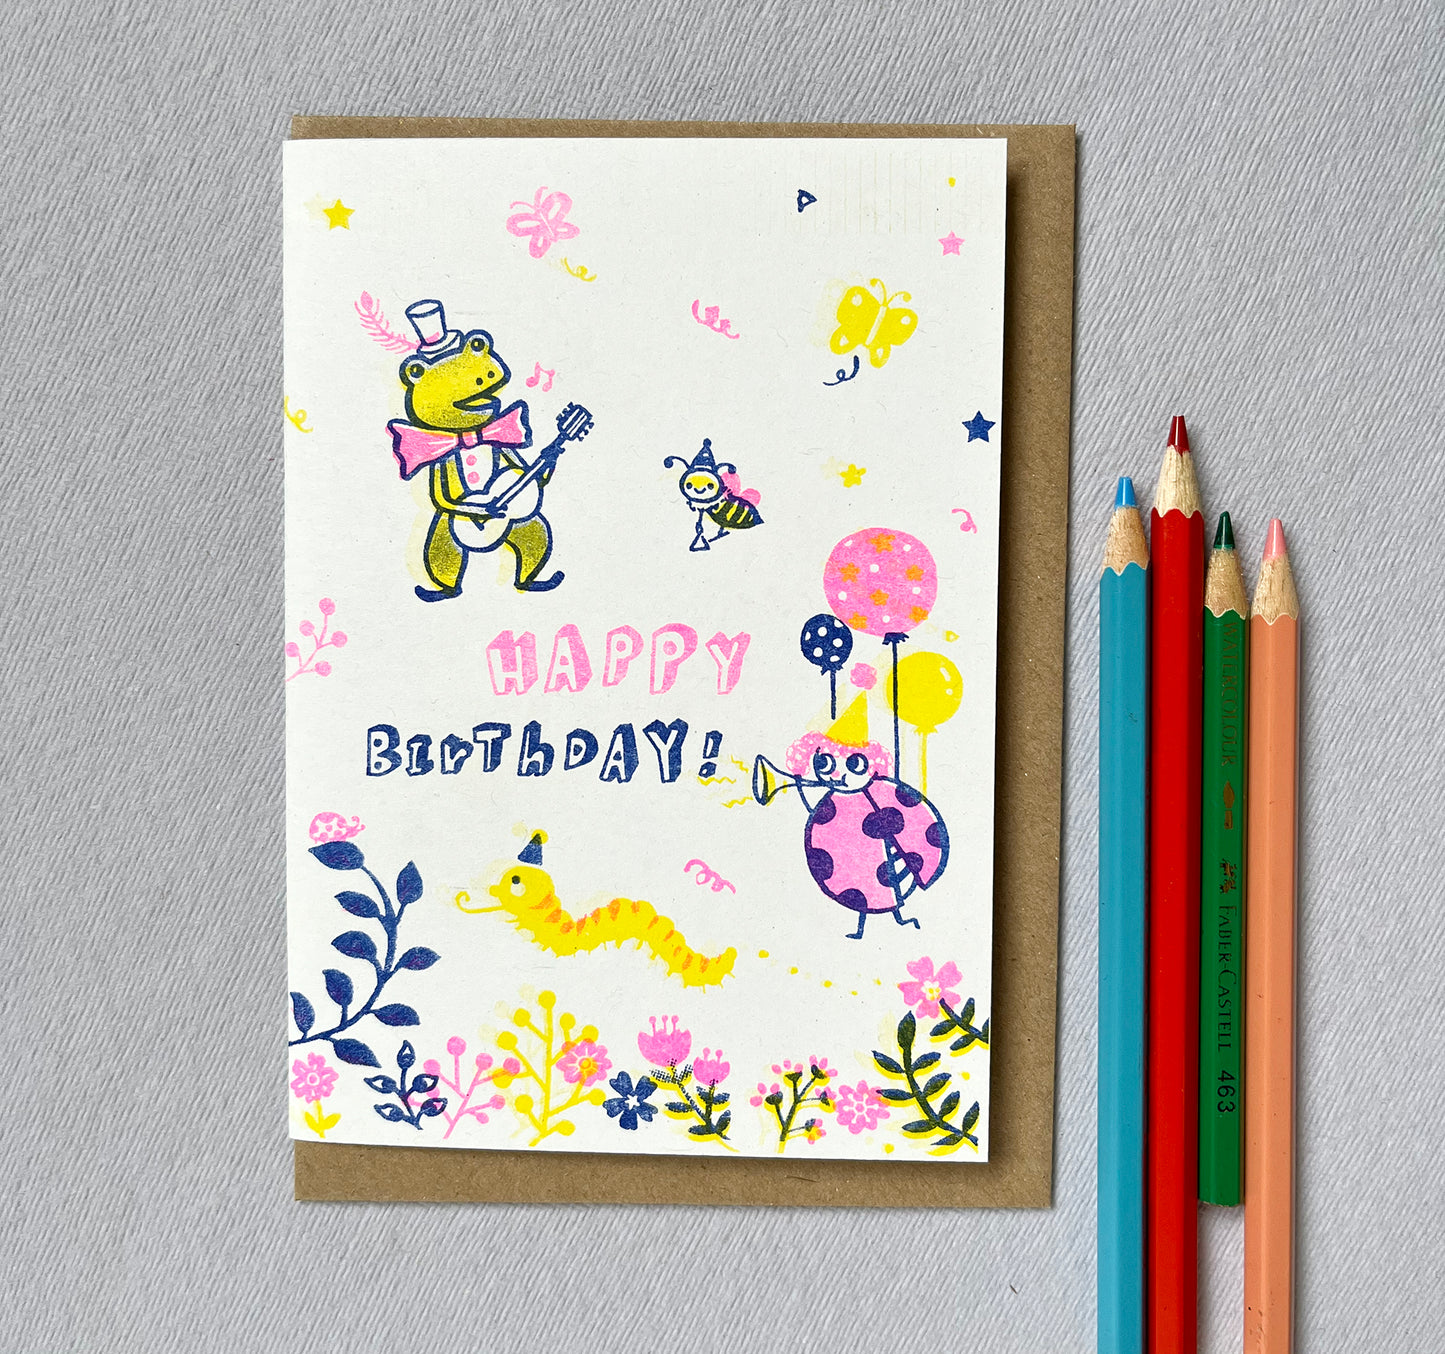 Birthday bugs party - A6 risograph greeting Card - congratulations birthday card